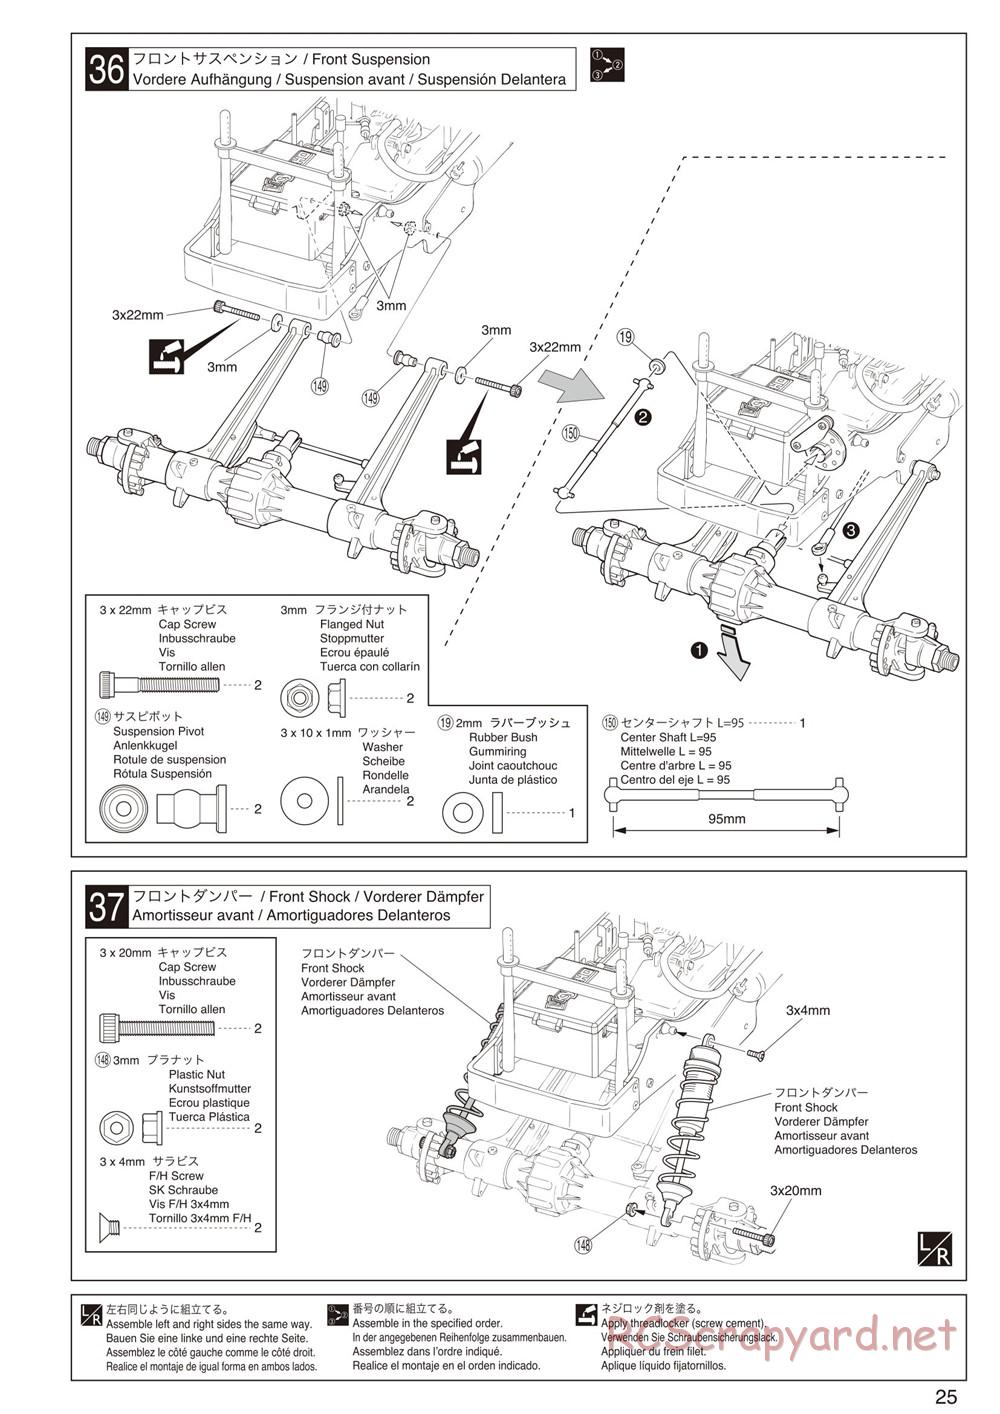 Kyosho - Mad Force Kruiser 2.0 - Manual - Page 25